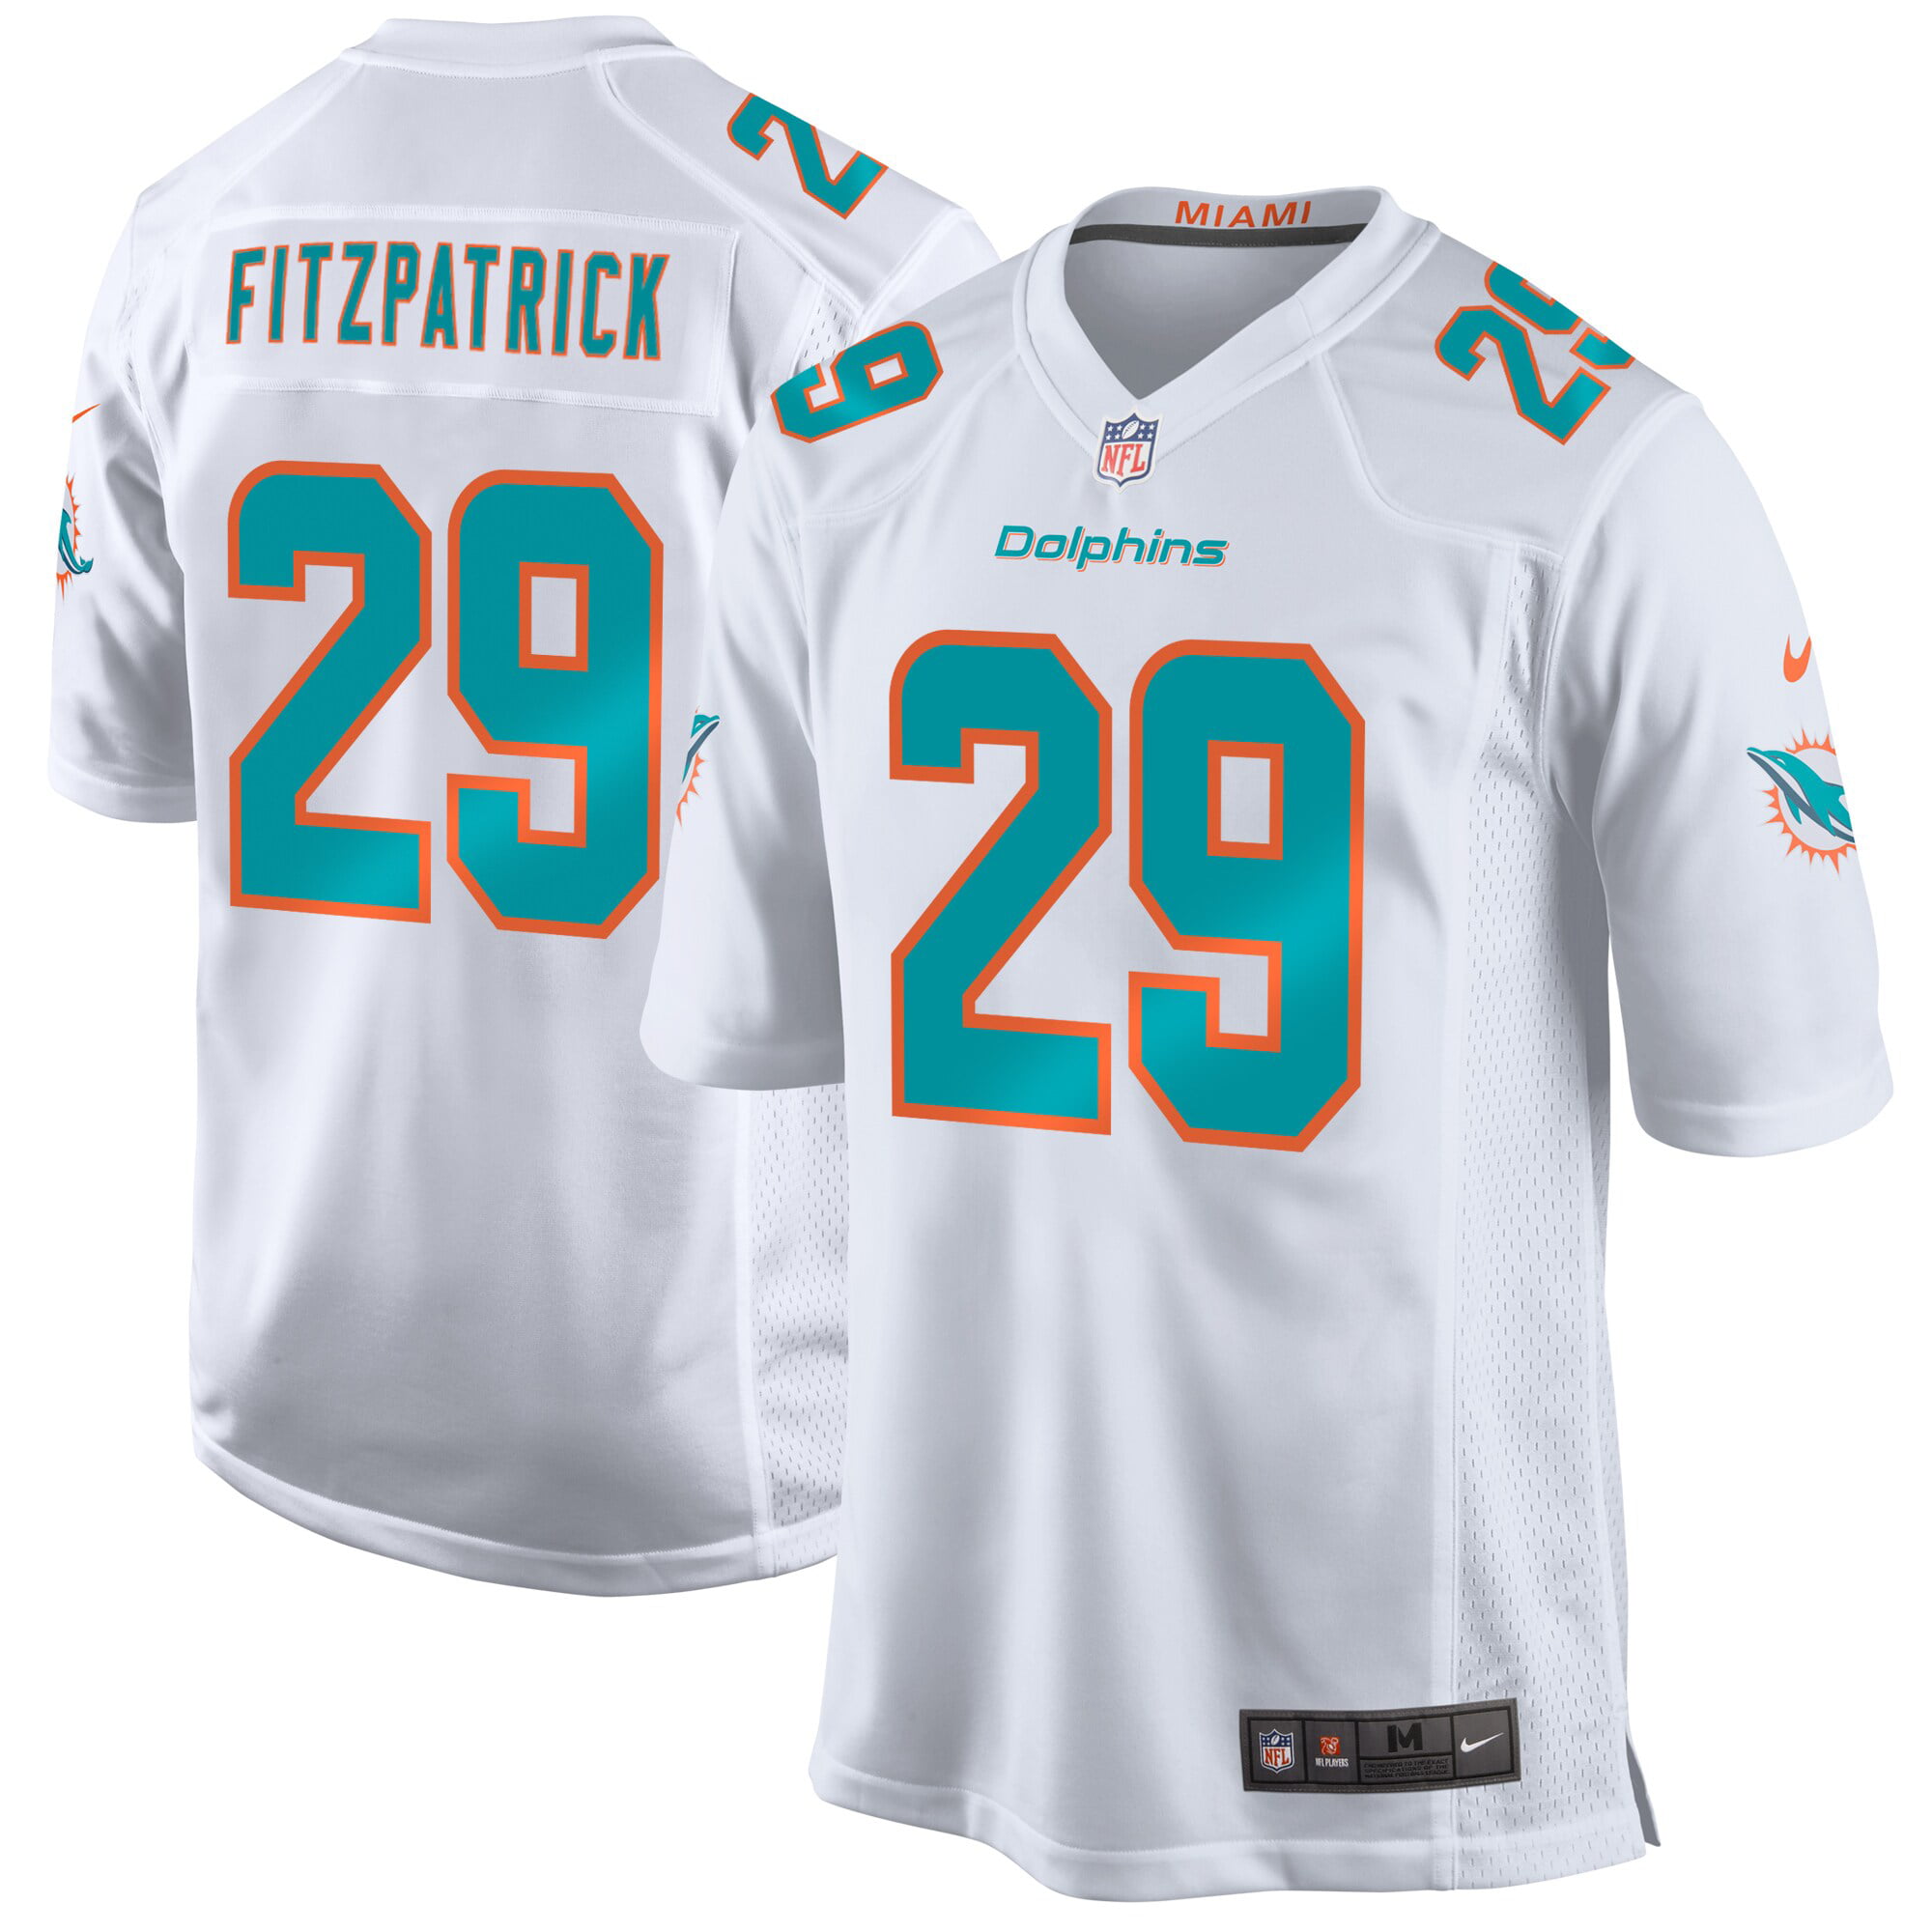 miami dolphin jerseys for sale